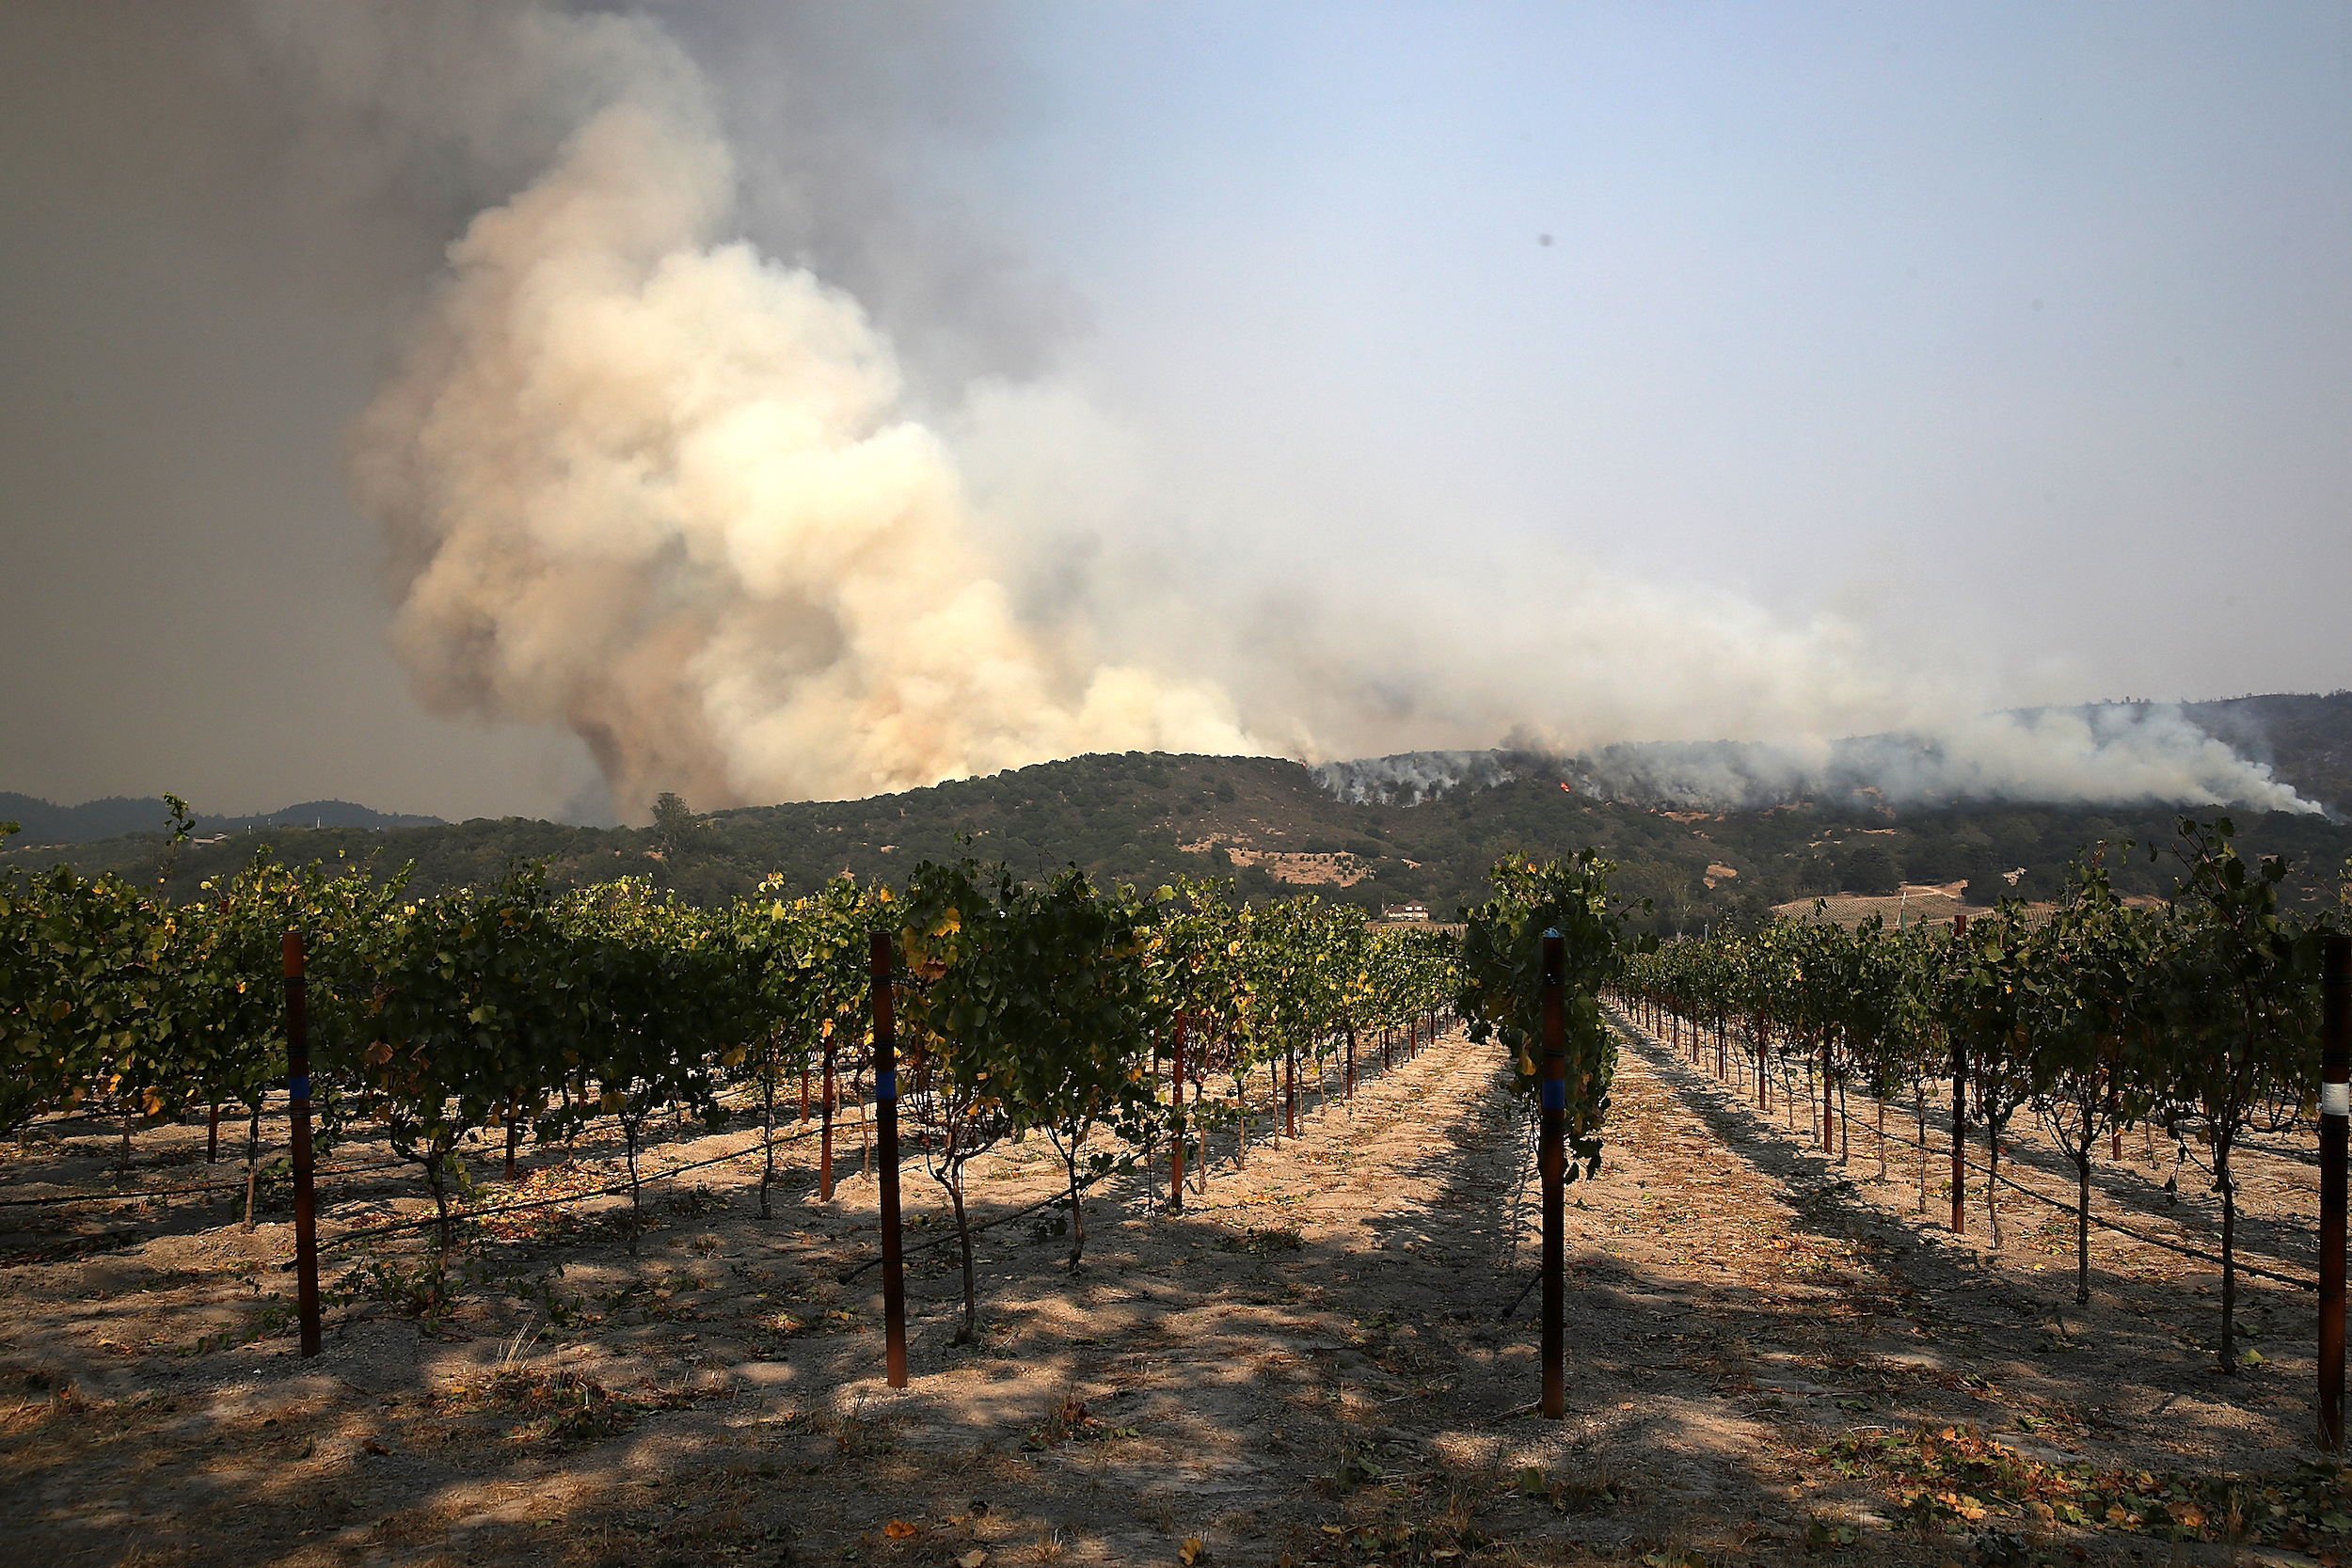 SONOMA, CA - OCTOBER 09:  An out of control wildfire approaches Gundlach Bundschu winery on October 9, 2017 in Sonoma, California. Ten people have died in wildfires that have burned tens of thousands of acres and destroyed over 1,500 homes and businesses in several Northen California counties.  (Photo by Justin Sullivan/Getty Images)